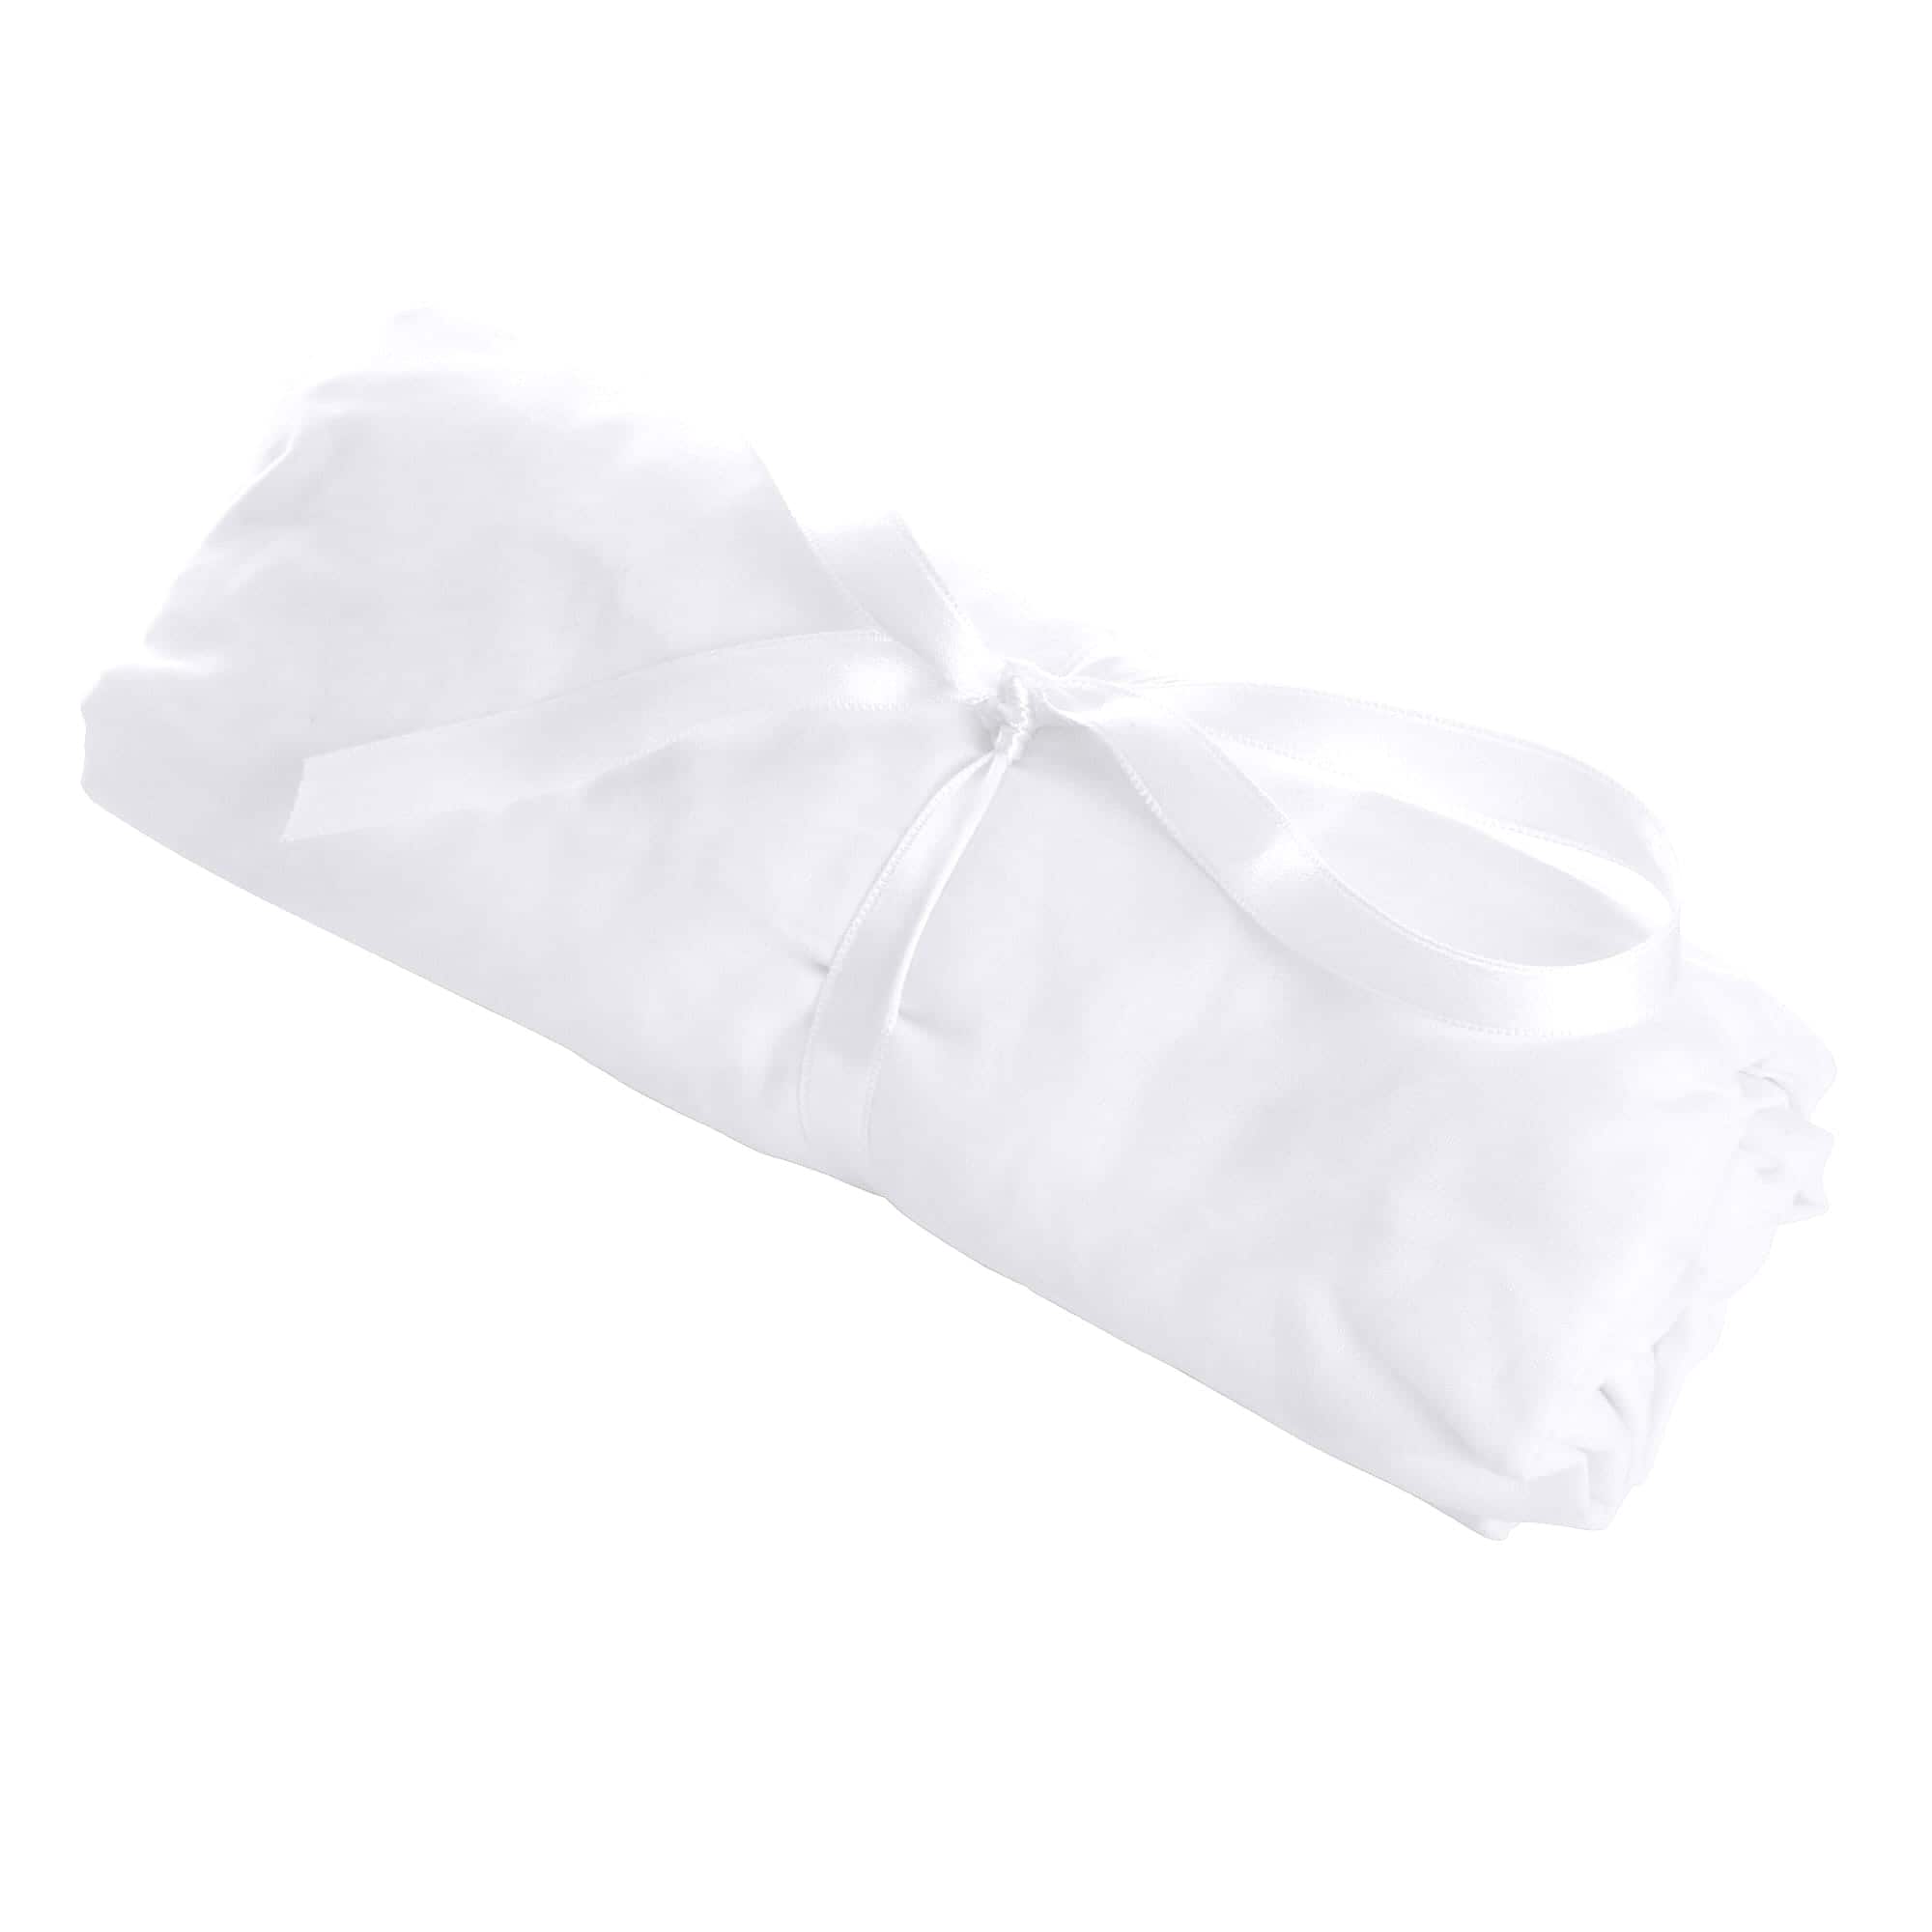 Theophile & Patachou Cot Bed Fitted Sheet 70x140cm - White